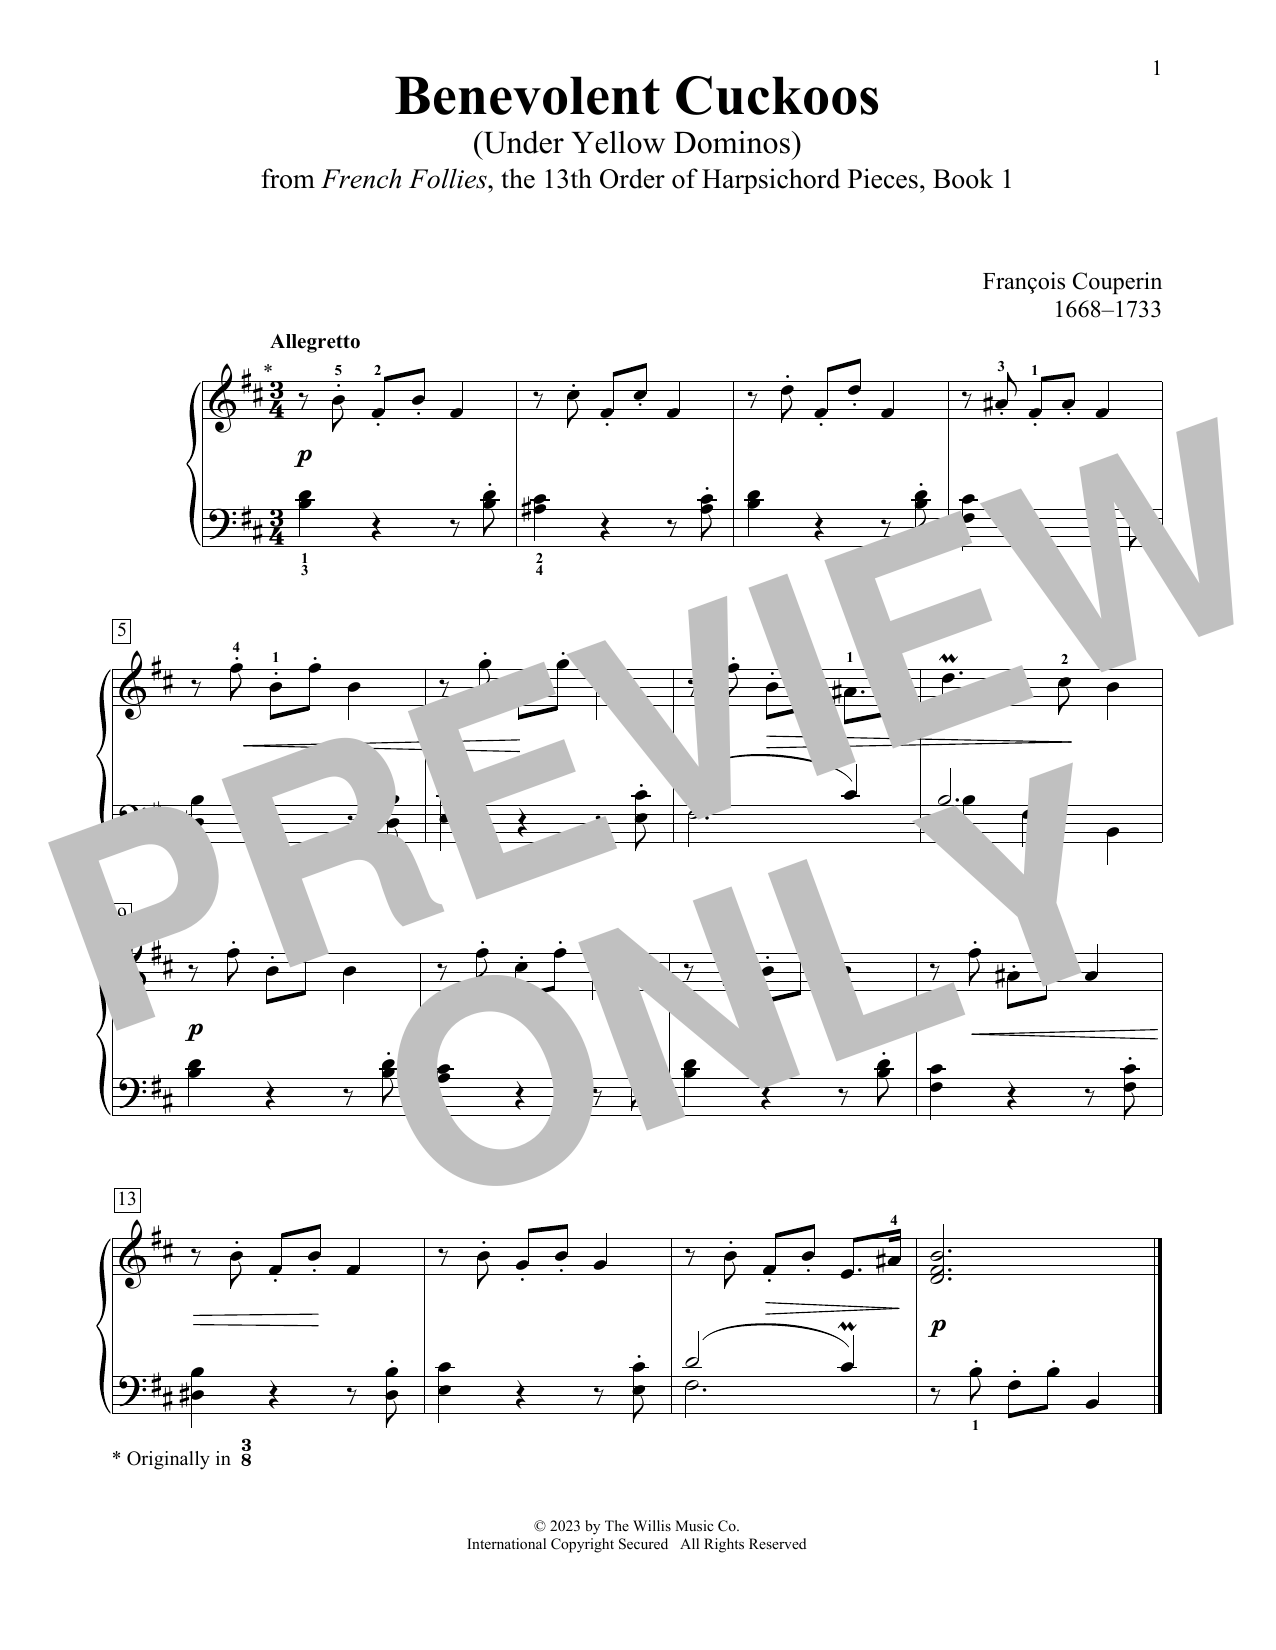 Francois Couperin Benevolent Cuckoos (Under Yellow Dominos) sheet music notes printable PDF score